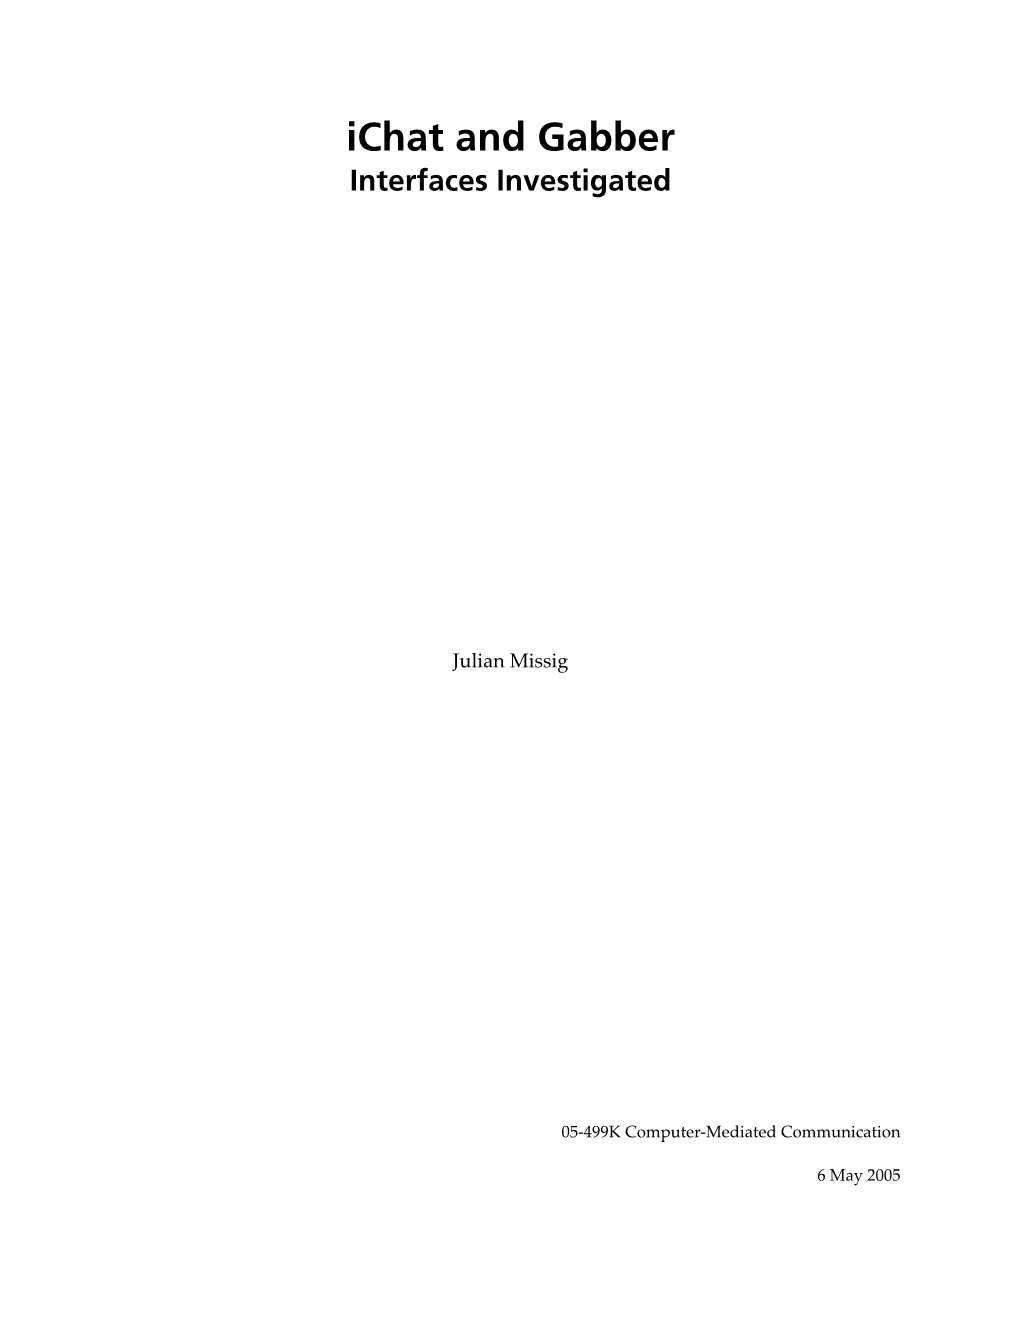 Ichat and Gabber Interfaces Investigated